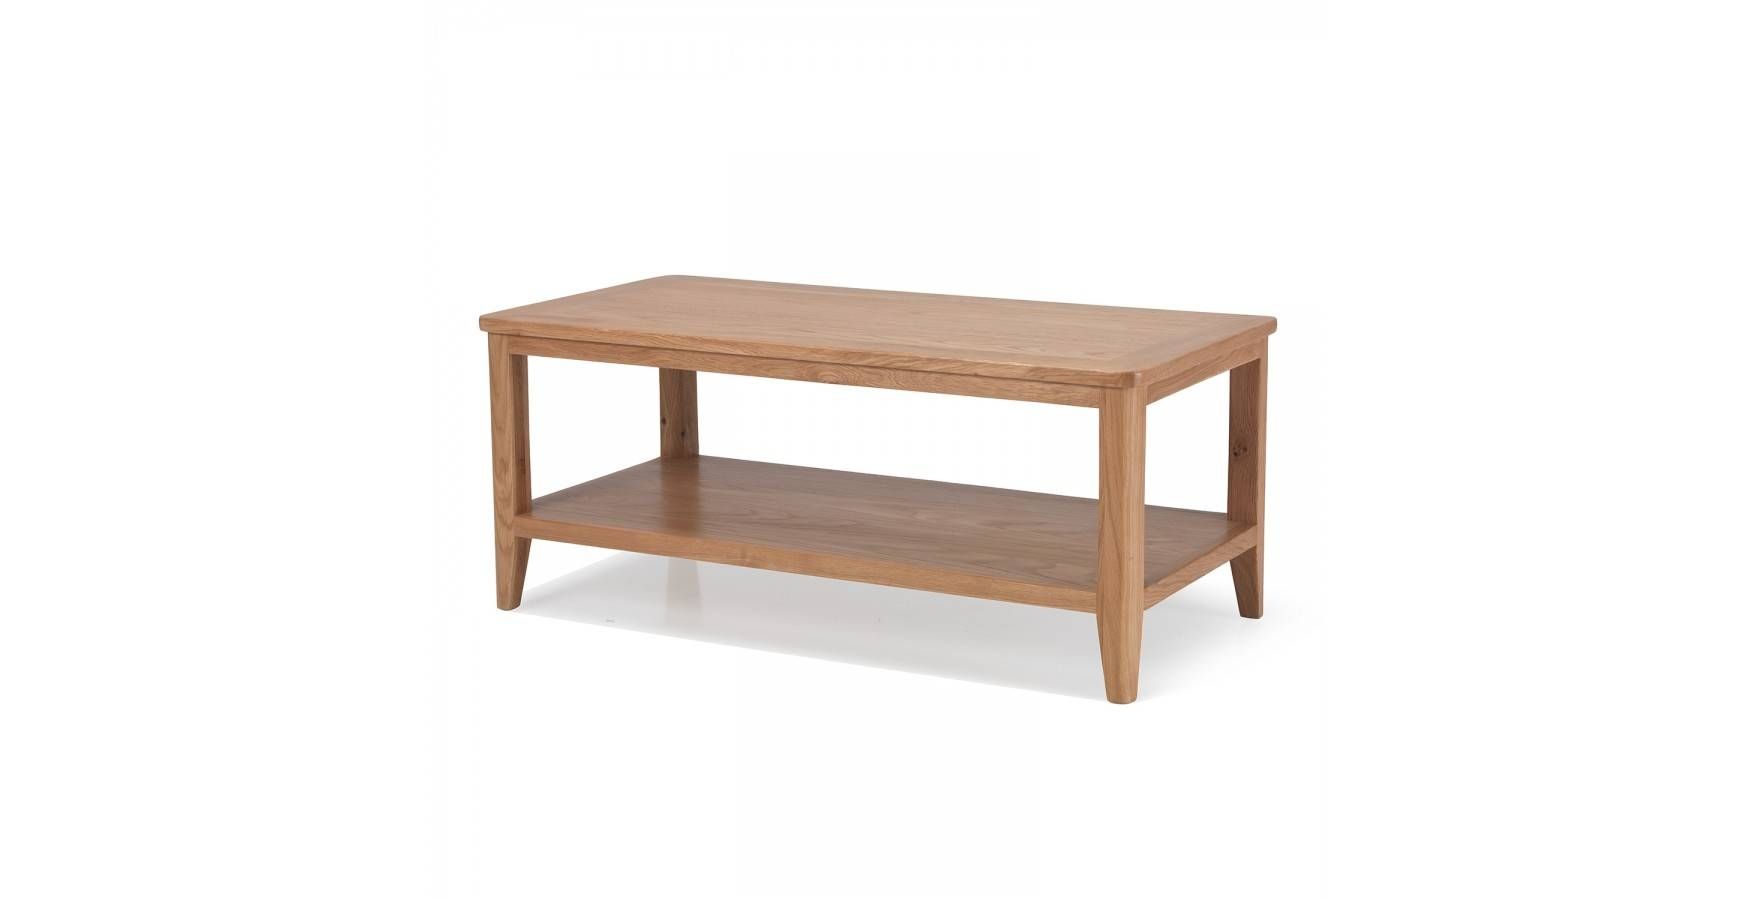 Cadley Oak Coffee Table With Shelf – Lifestyle Furniture Uk Within Oak Coffee Tables With Shelf (View 20 of 30)